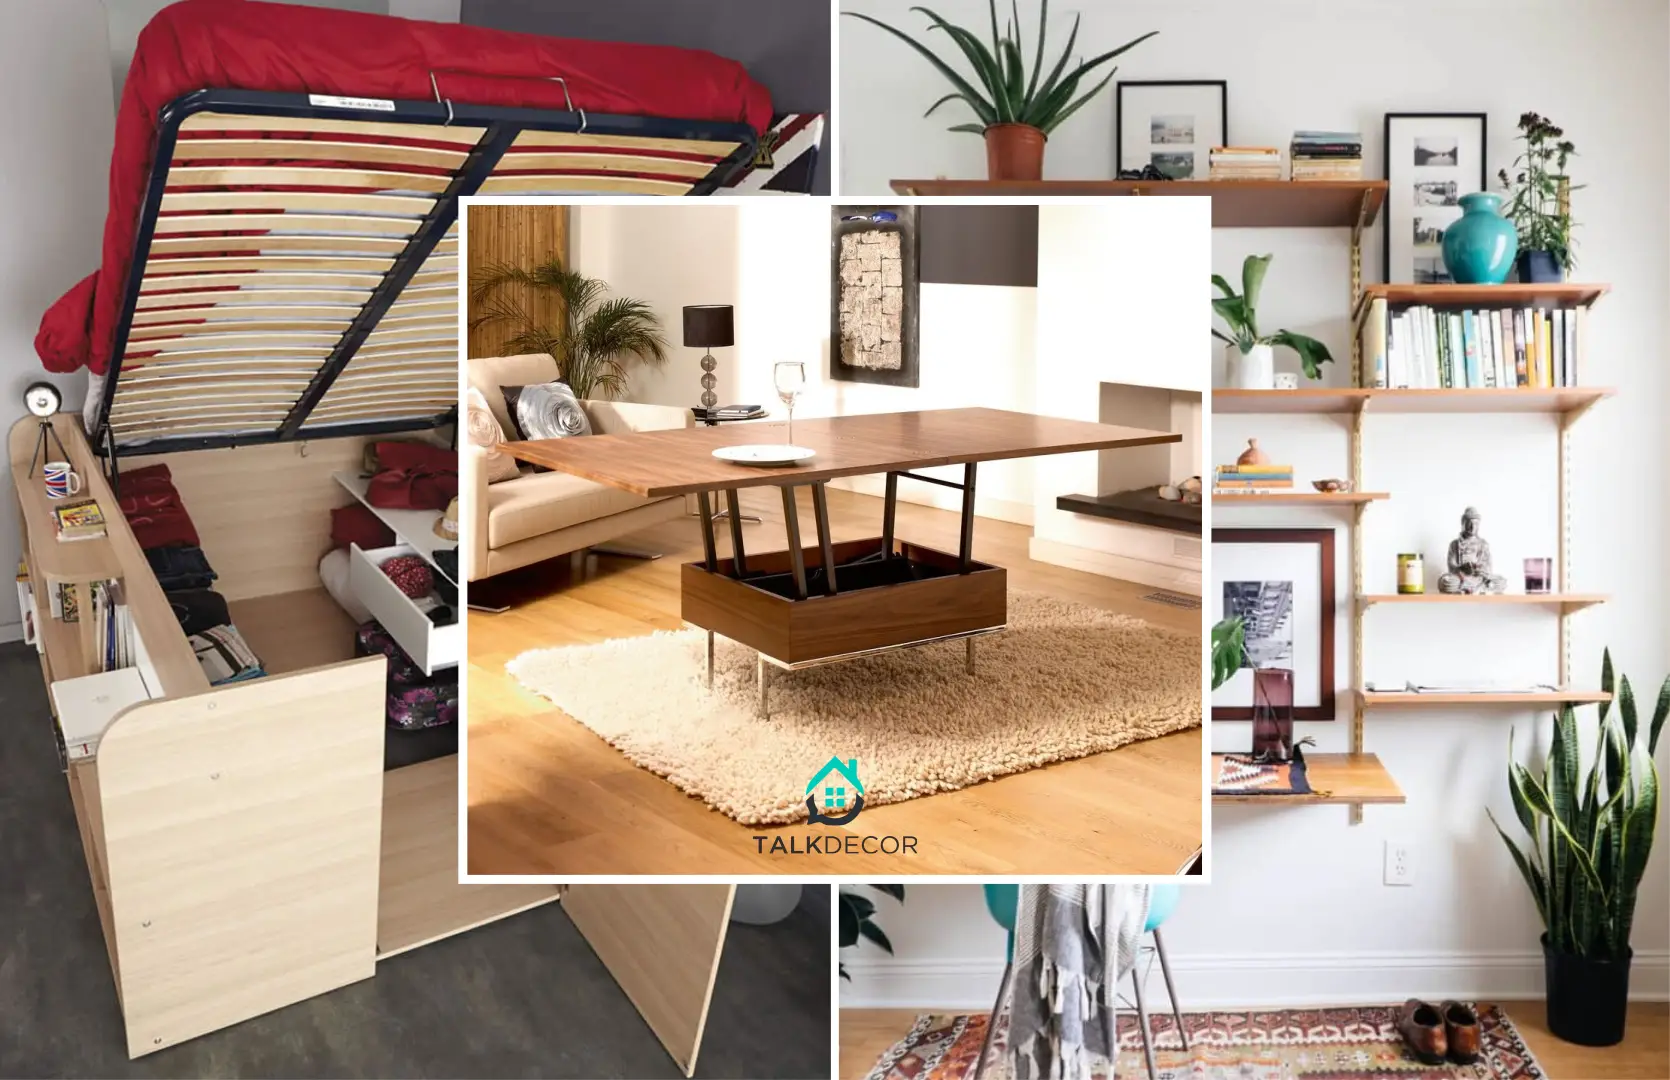 Free up Your Apartment Space with These 10 Space-Saving Furniture